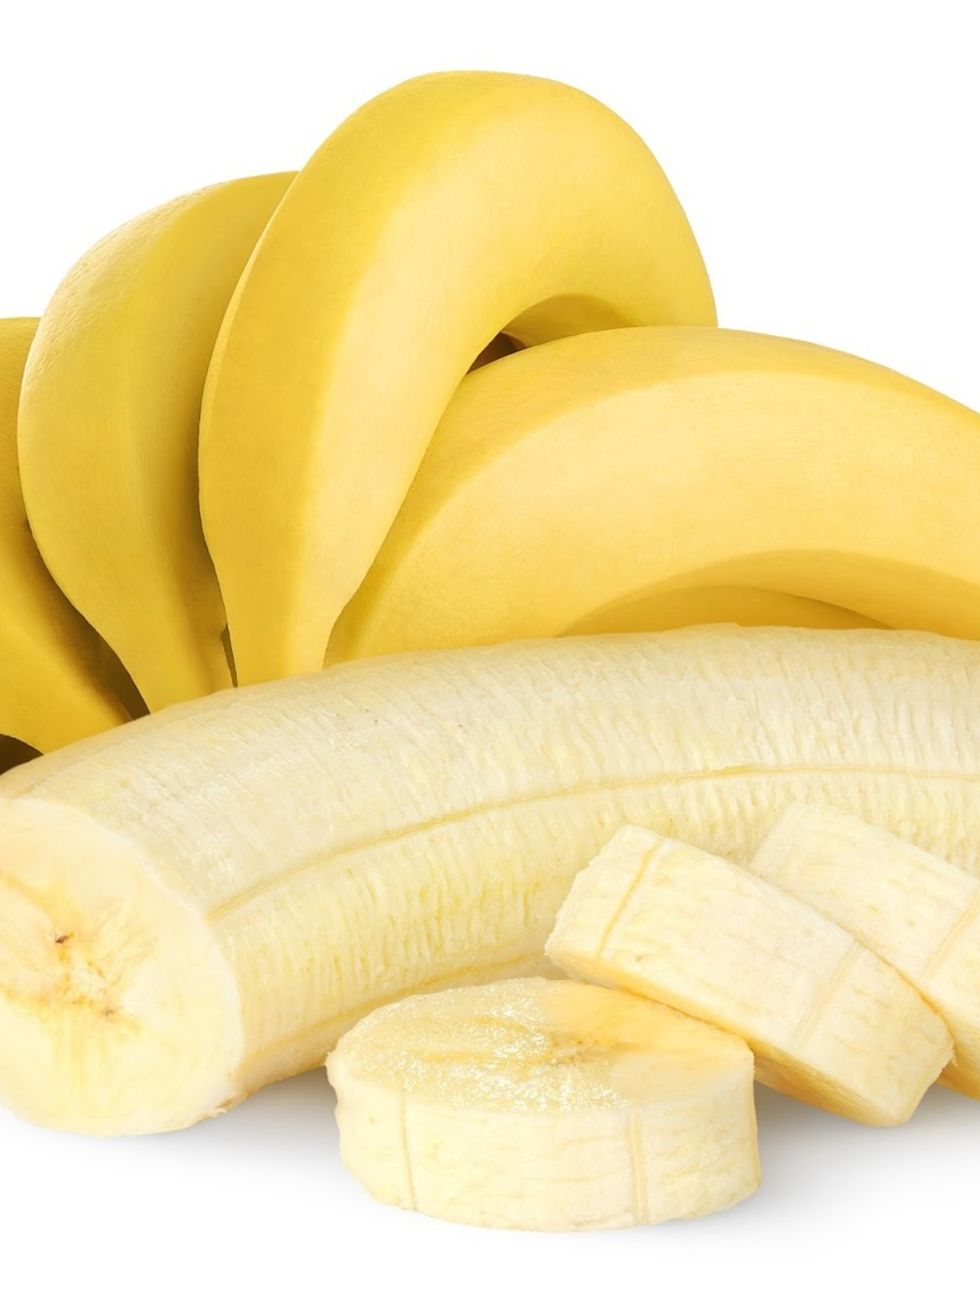 Yellow, Food, Natural foods, Fruit, Produce, Whole food, Vegan nutrition, Ingredient, Cooking plantain, Banana family, 